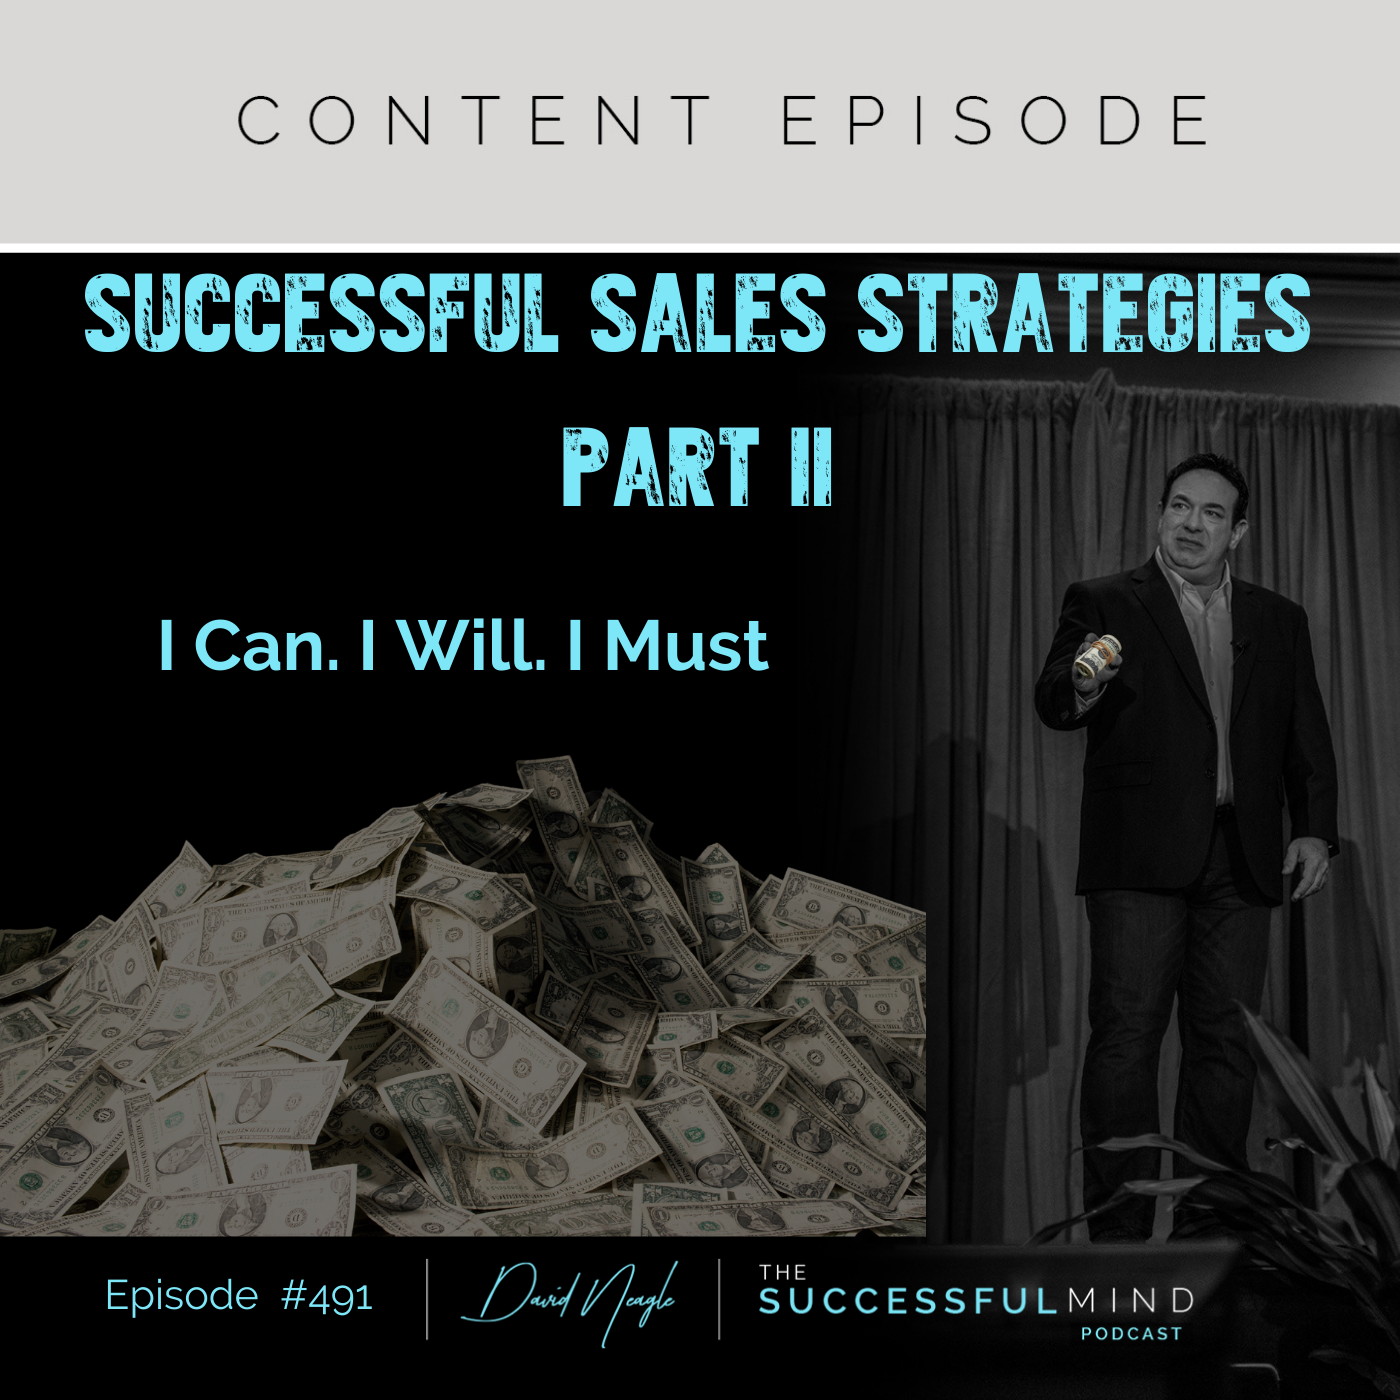 The Successful Mind Podcast – Episode 491 – Successful Sales Strategies Part II – I Can. I Will. I Must.